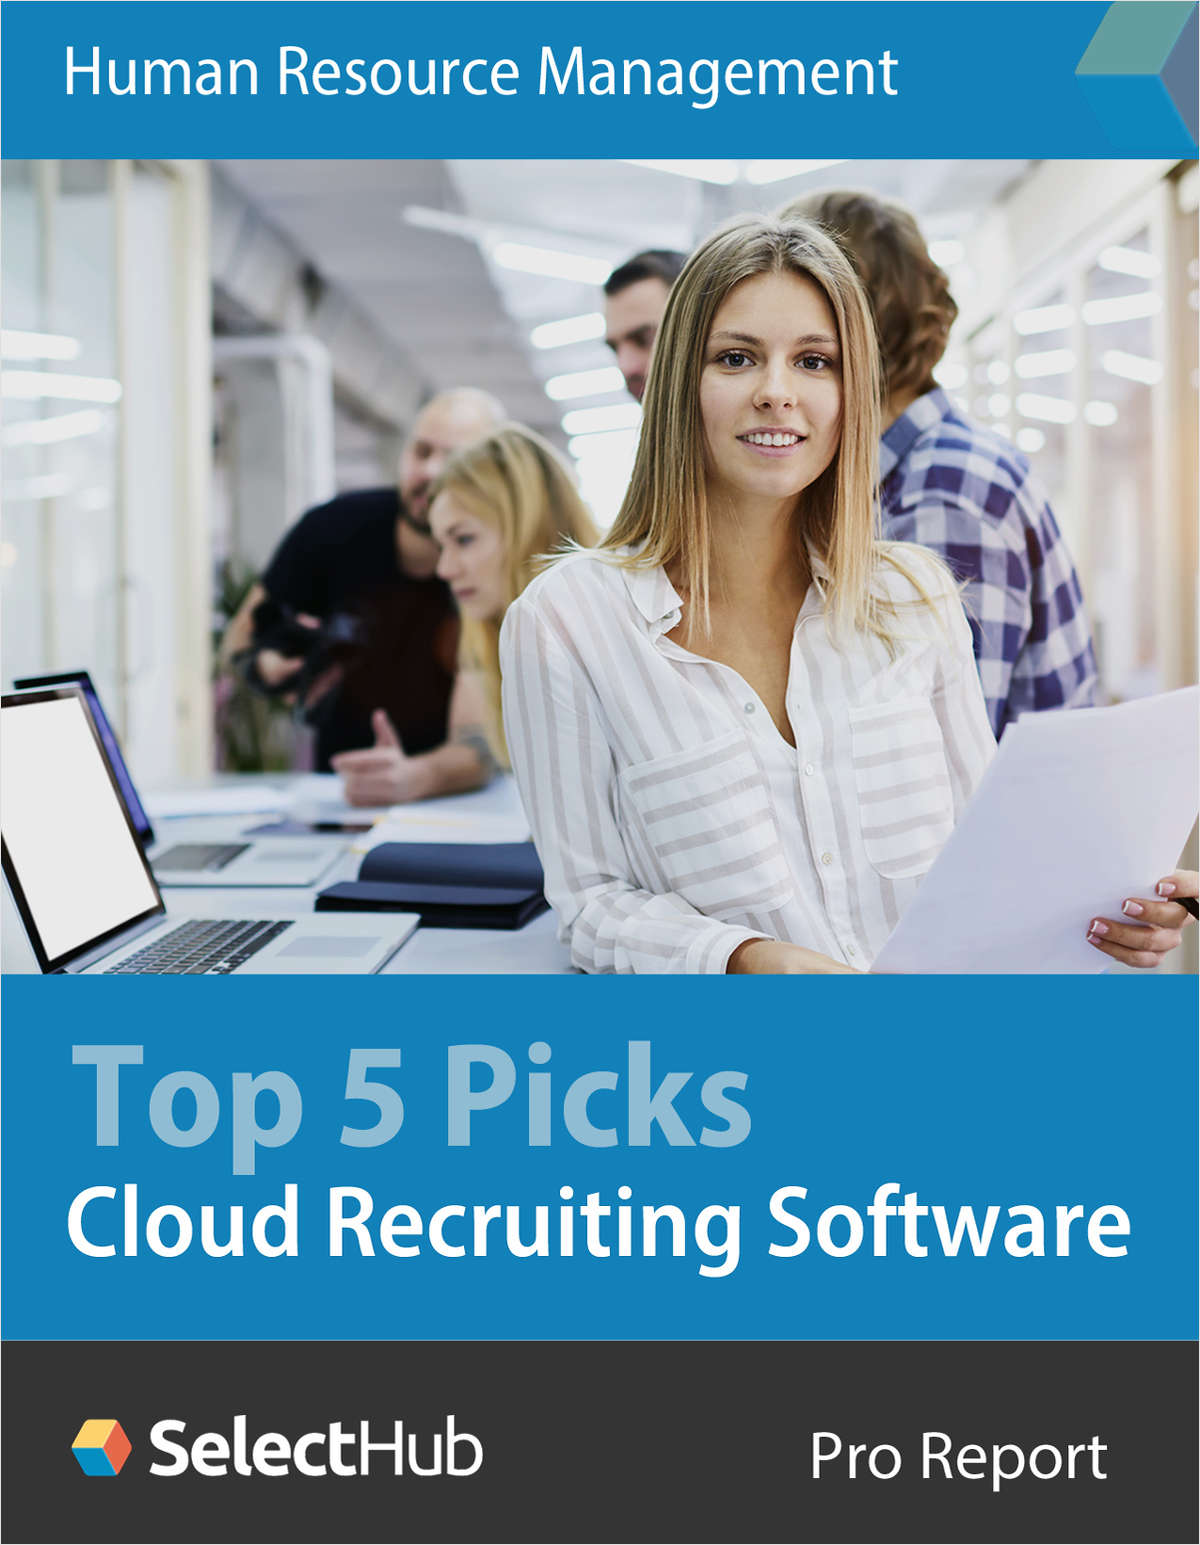 Best Cloud Recruitment Software--Expert Evaluations, Recommendations & Top 5 Picks for 2020